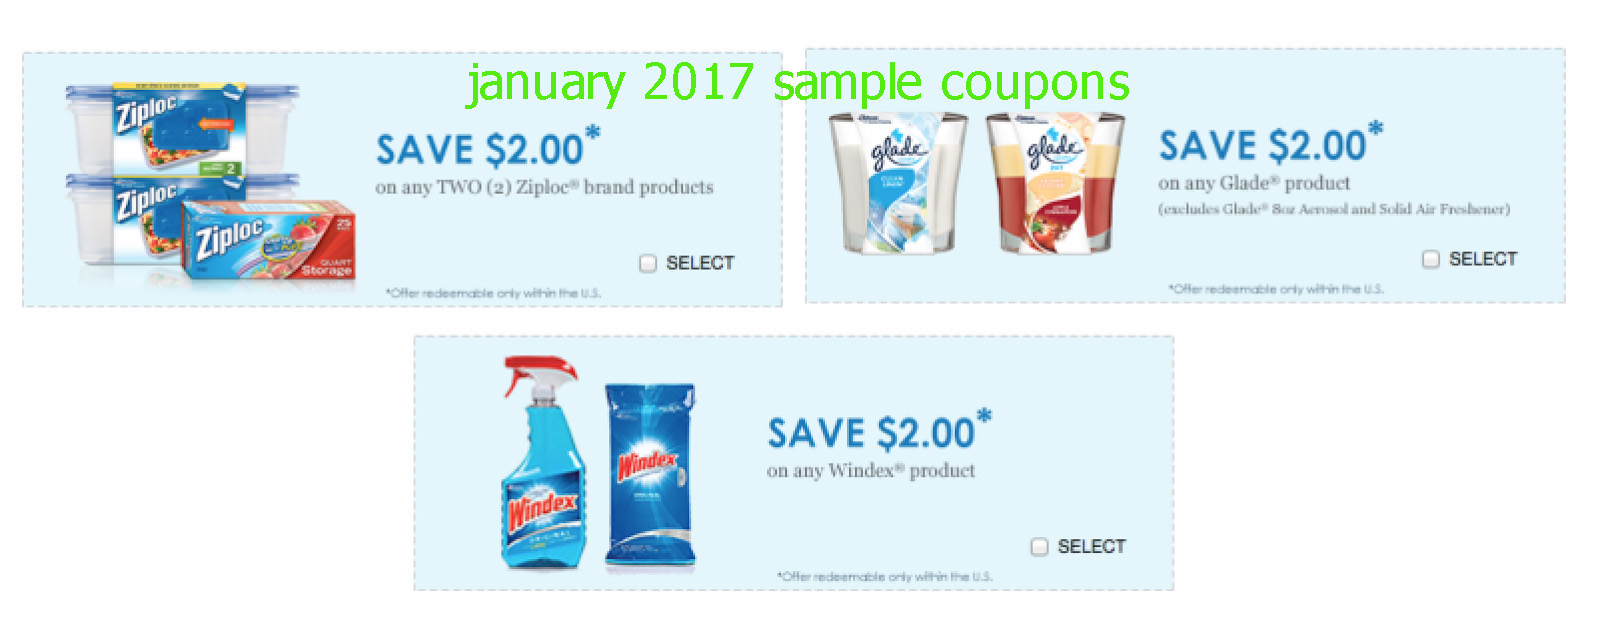 Free Promo Codes and Coupons 2021: Glade Coupons